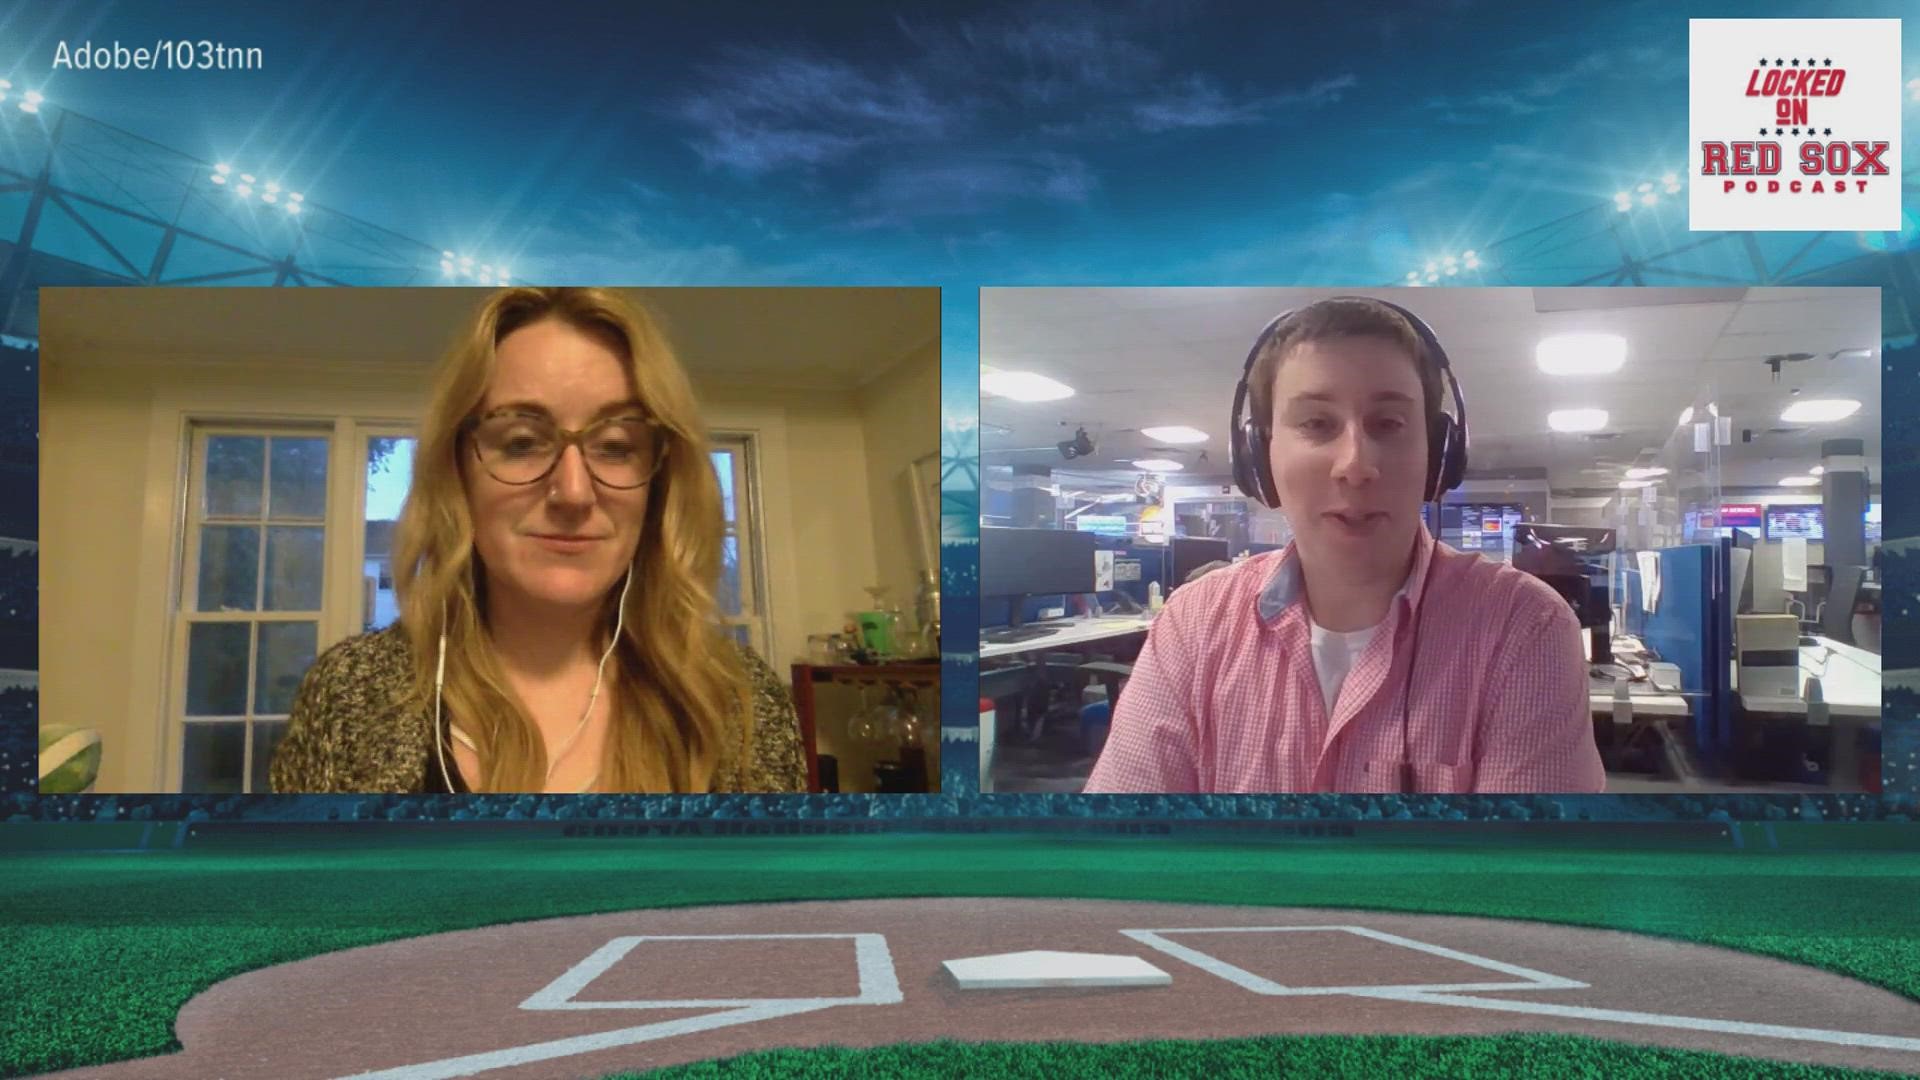 Lauren Campbell from the Locked on Red Sox podcast talks with Isaac Luken about the Red Sox matchup vs the Yankees in the AL Wild Card game.